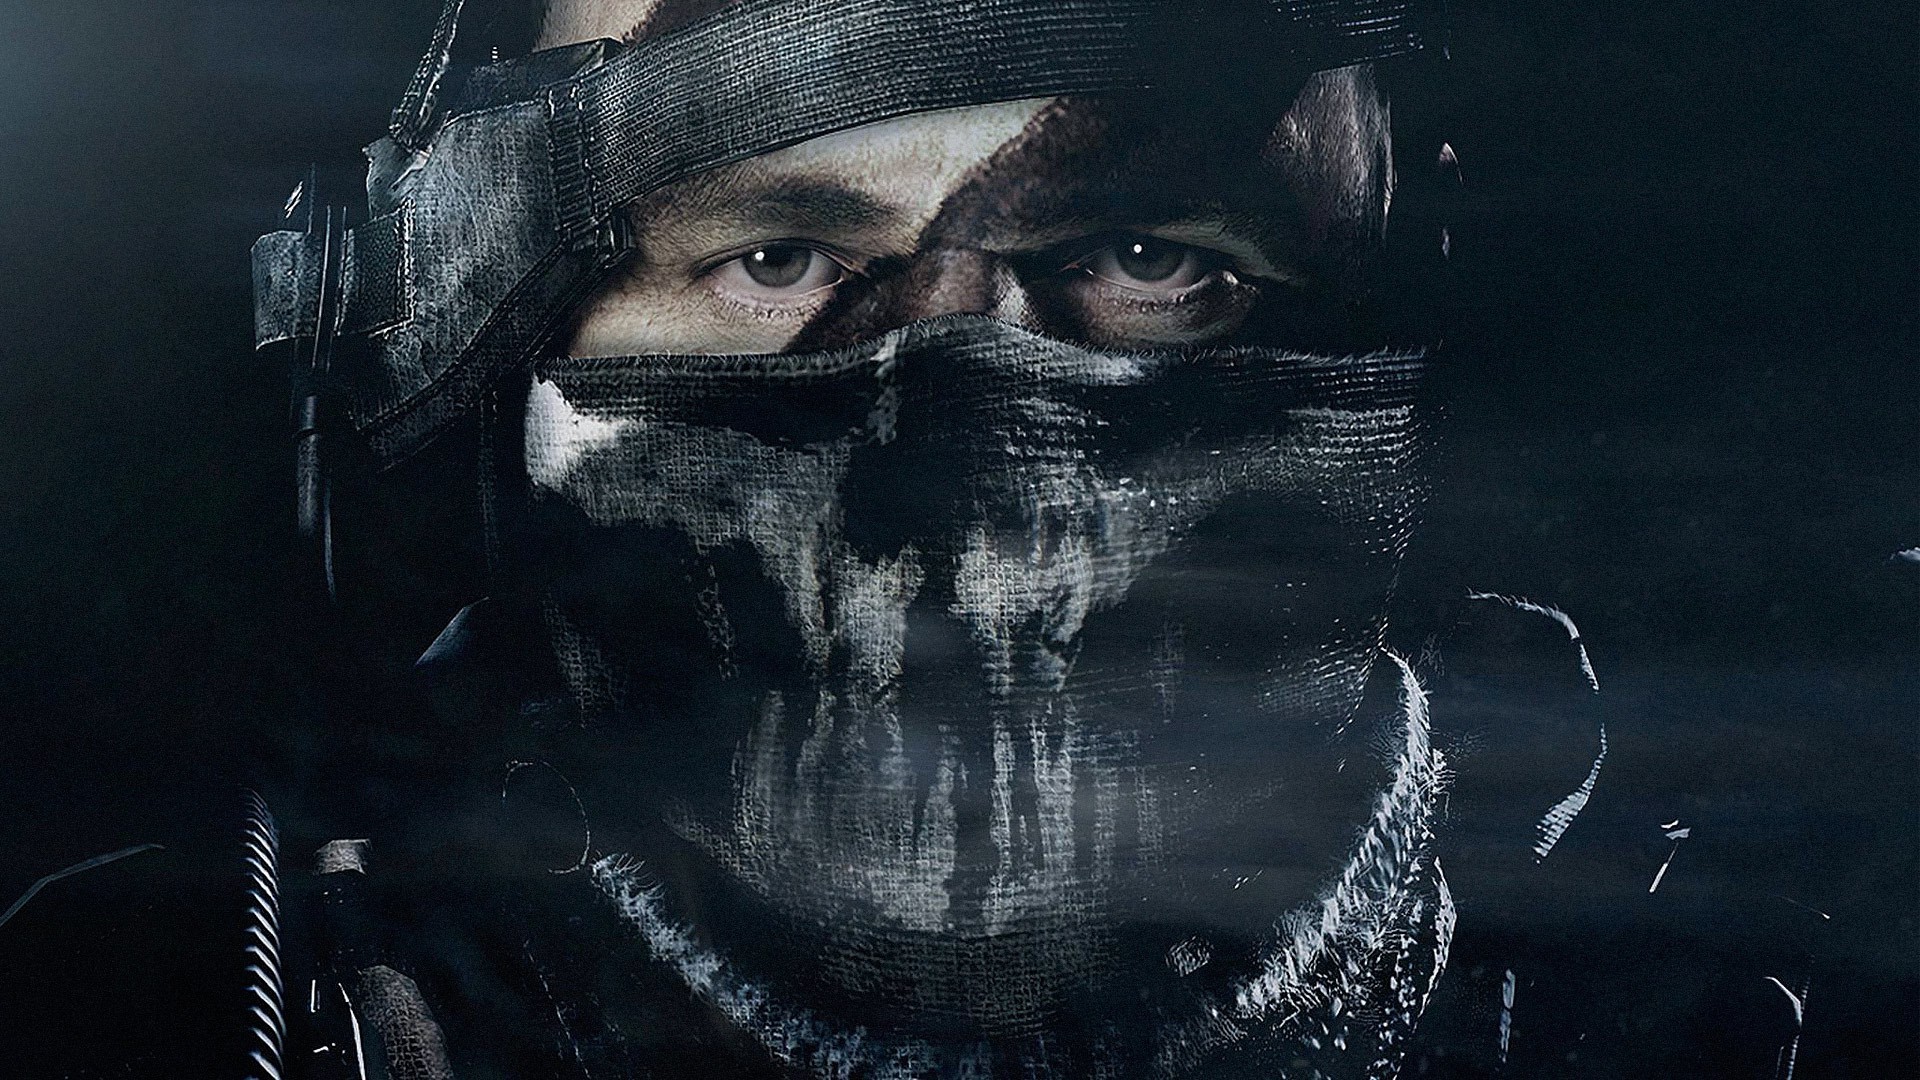 Wallpaper x px call of duty call of duty ghosts x